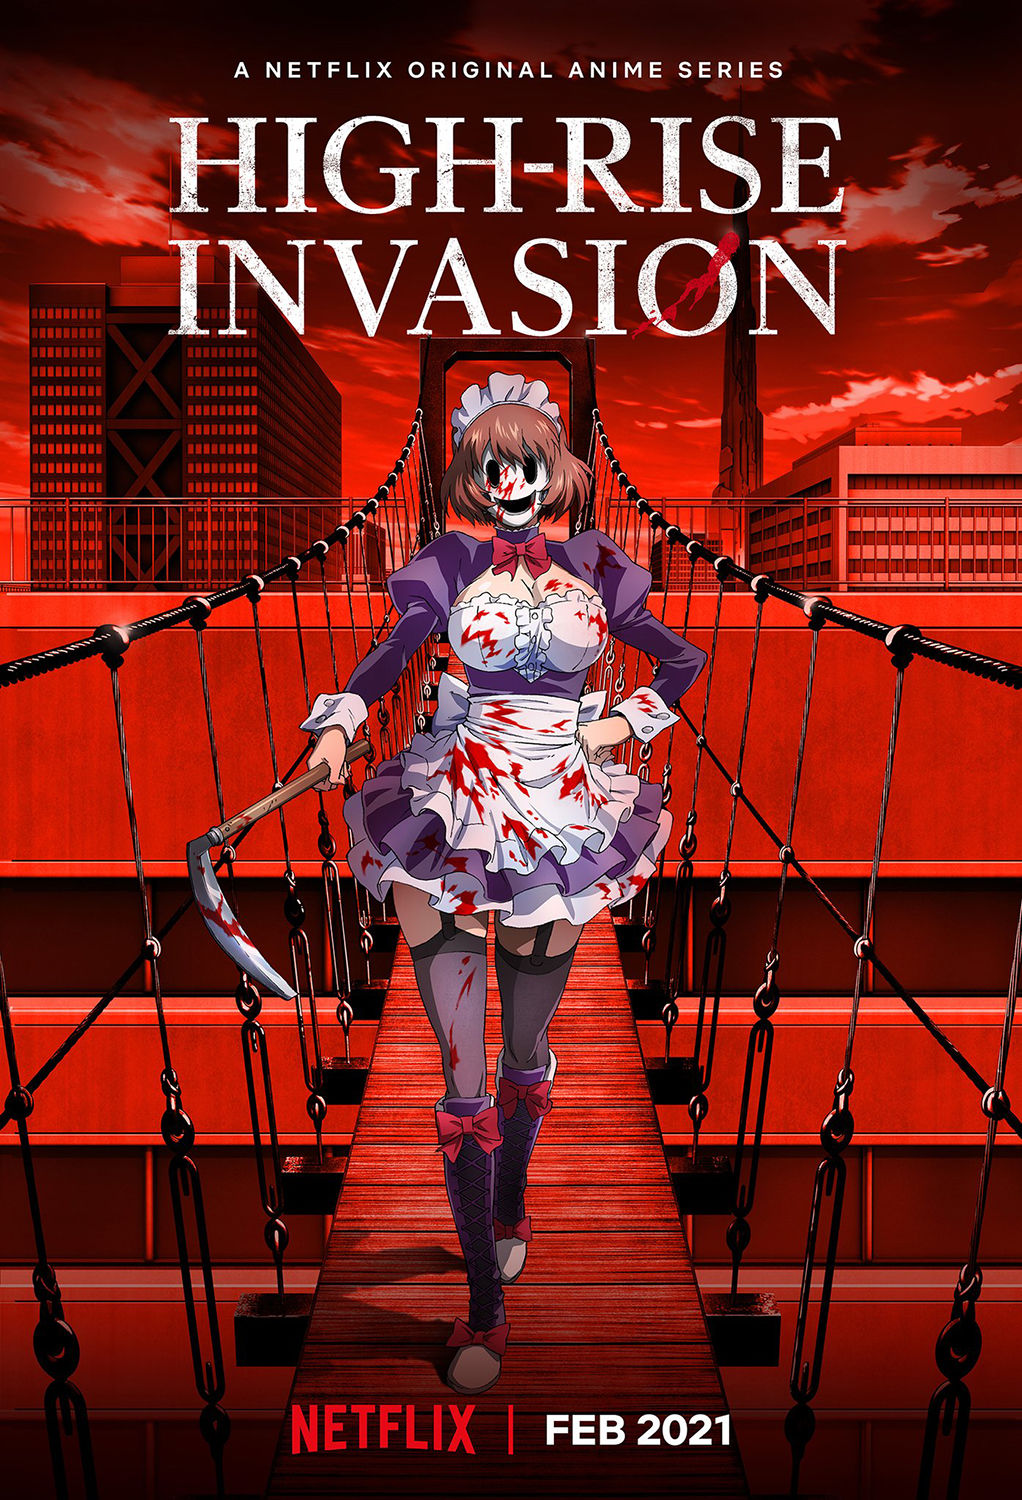 Amazon.com: High Rise Invasion Anime Fabric Wall Scroll Poster (32x46)  Inches [A] High Rise Invasion-6(L): Posters & Prints